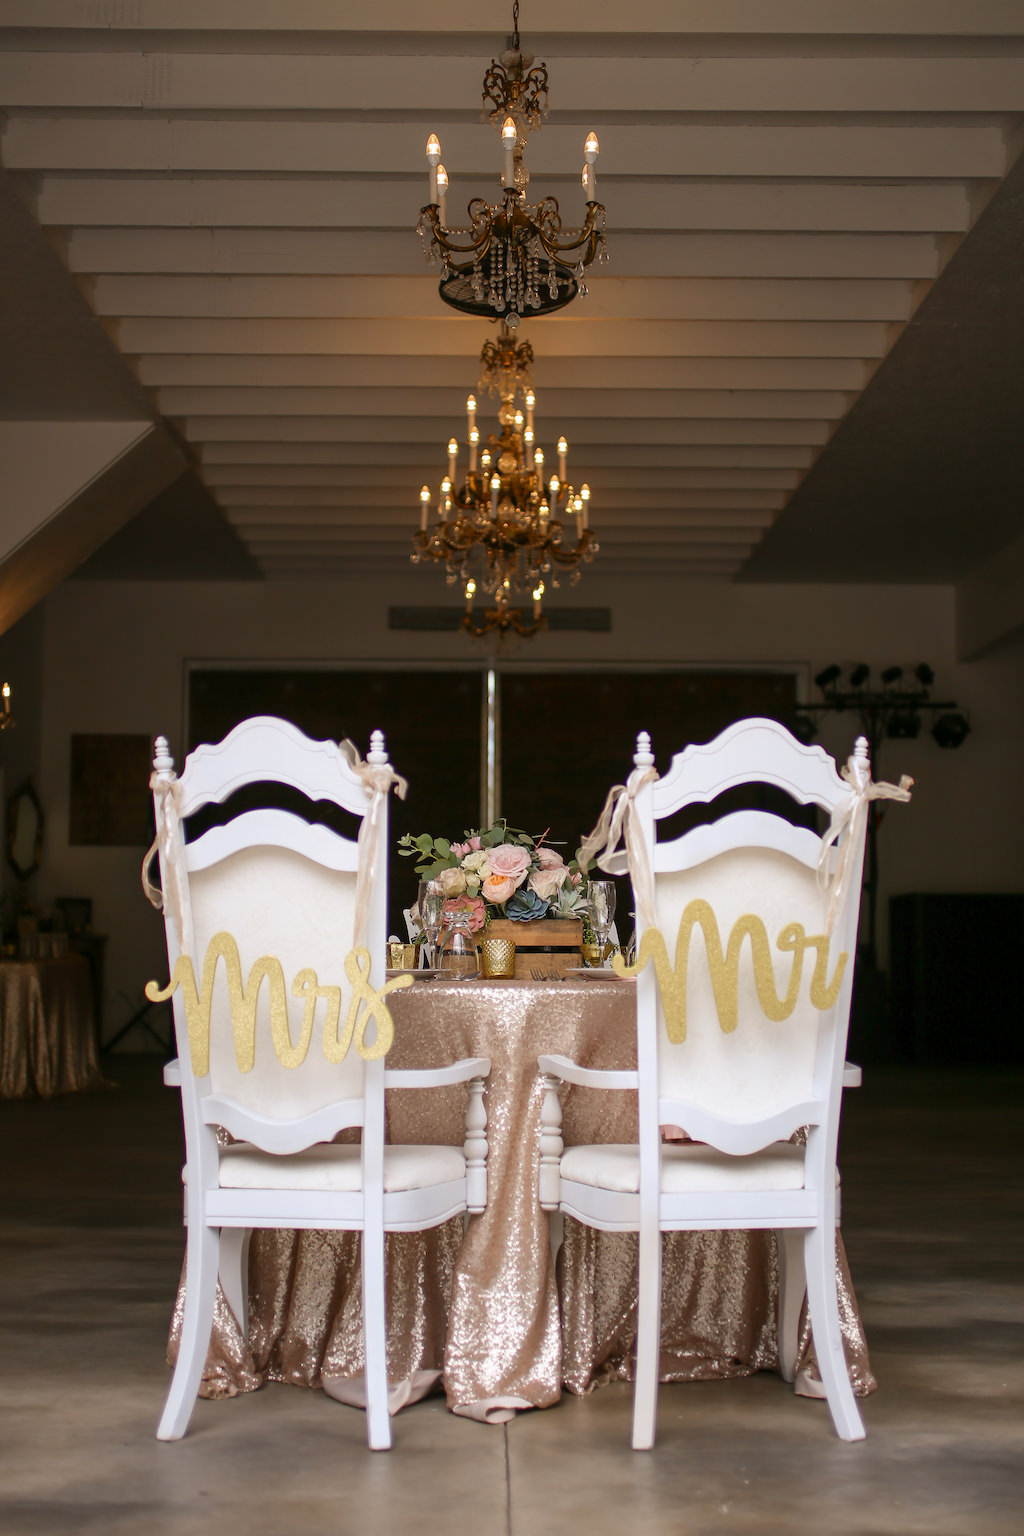 Rustic Wedding Reception Decor, Sweetheart Table with Glitter Rose Gold Linen, Vintage Chairs with Custom Gold Laser Cut Mr and Mrs Signs | Tampa Bay Wedding Photographer Lifelong Photography Studios | Florida Rustic WEdding Venue The White Barn